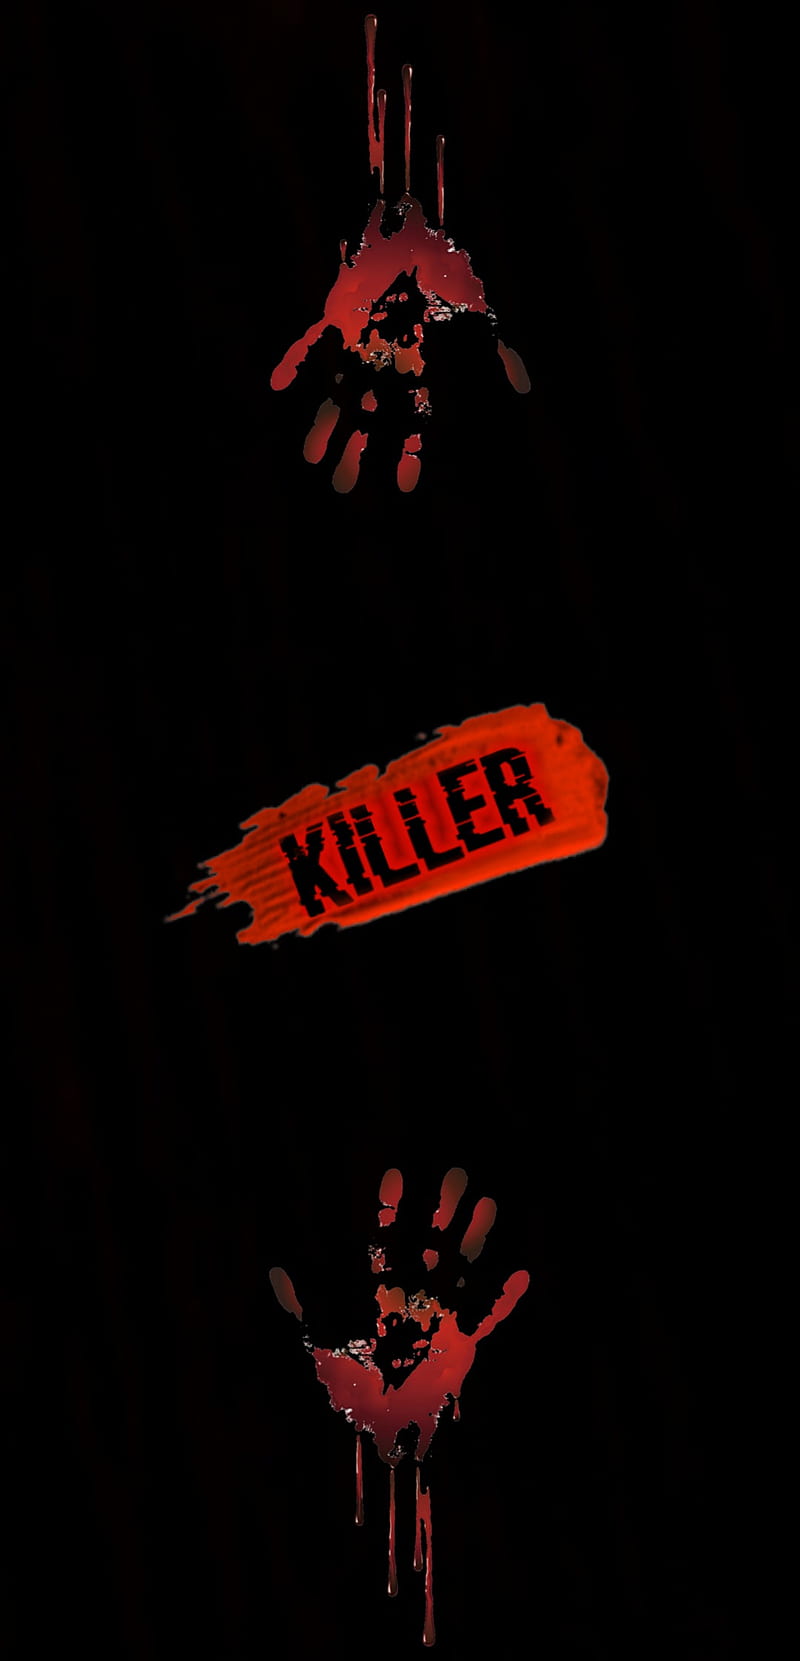 Serial Killer Fabric Wallpaper and Home Decor  Spoonflower